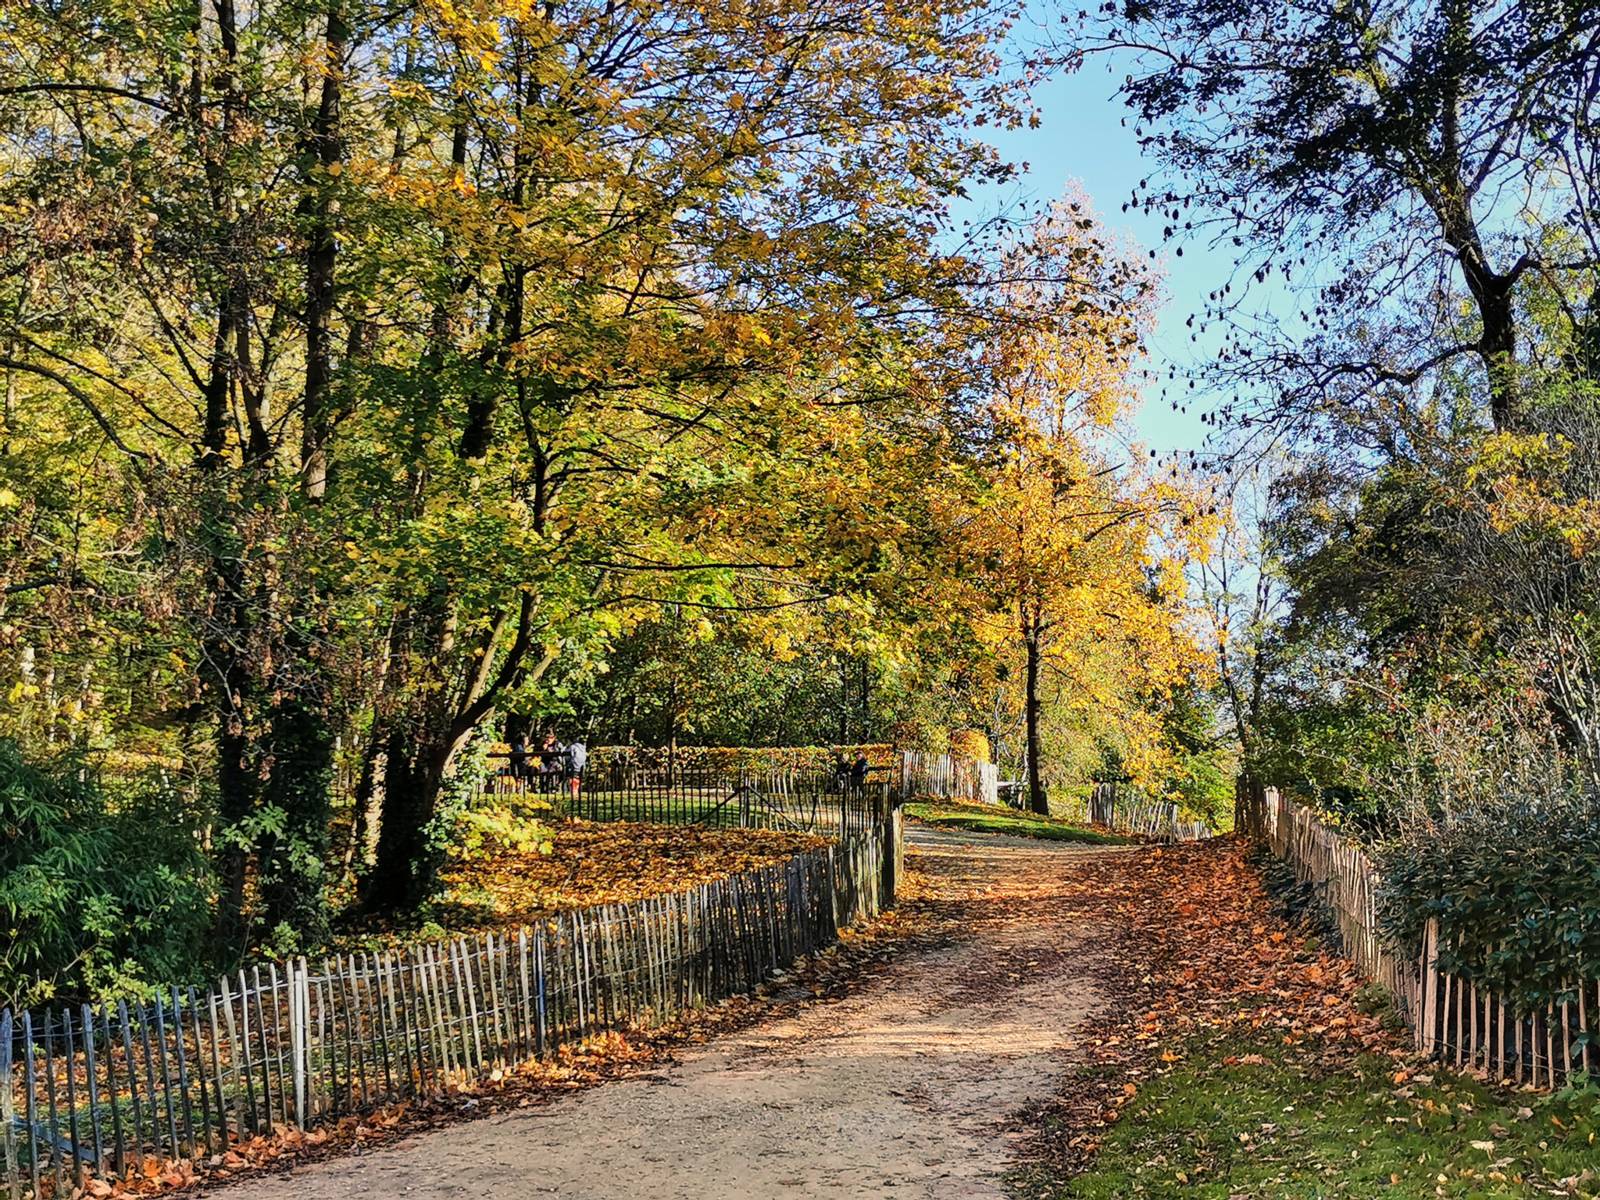 View of a park during autumn